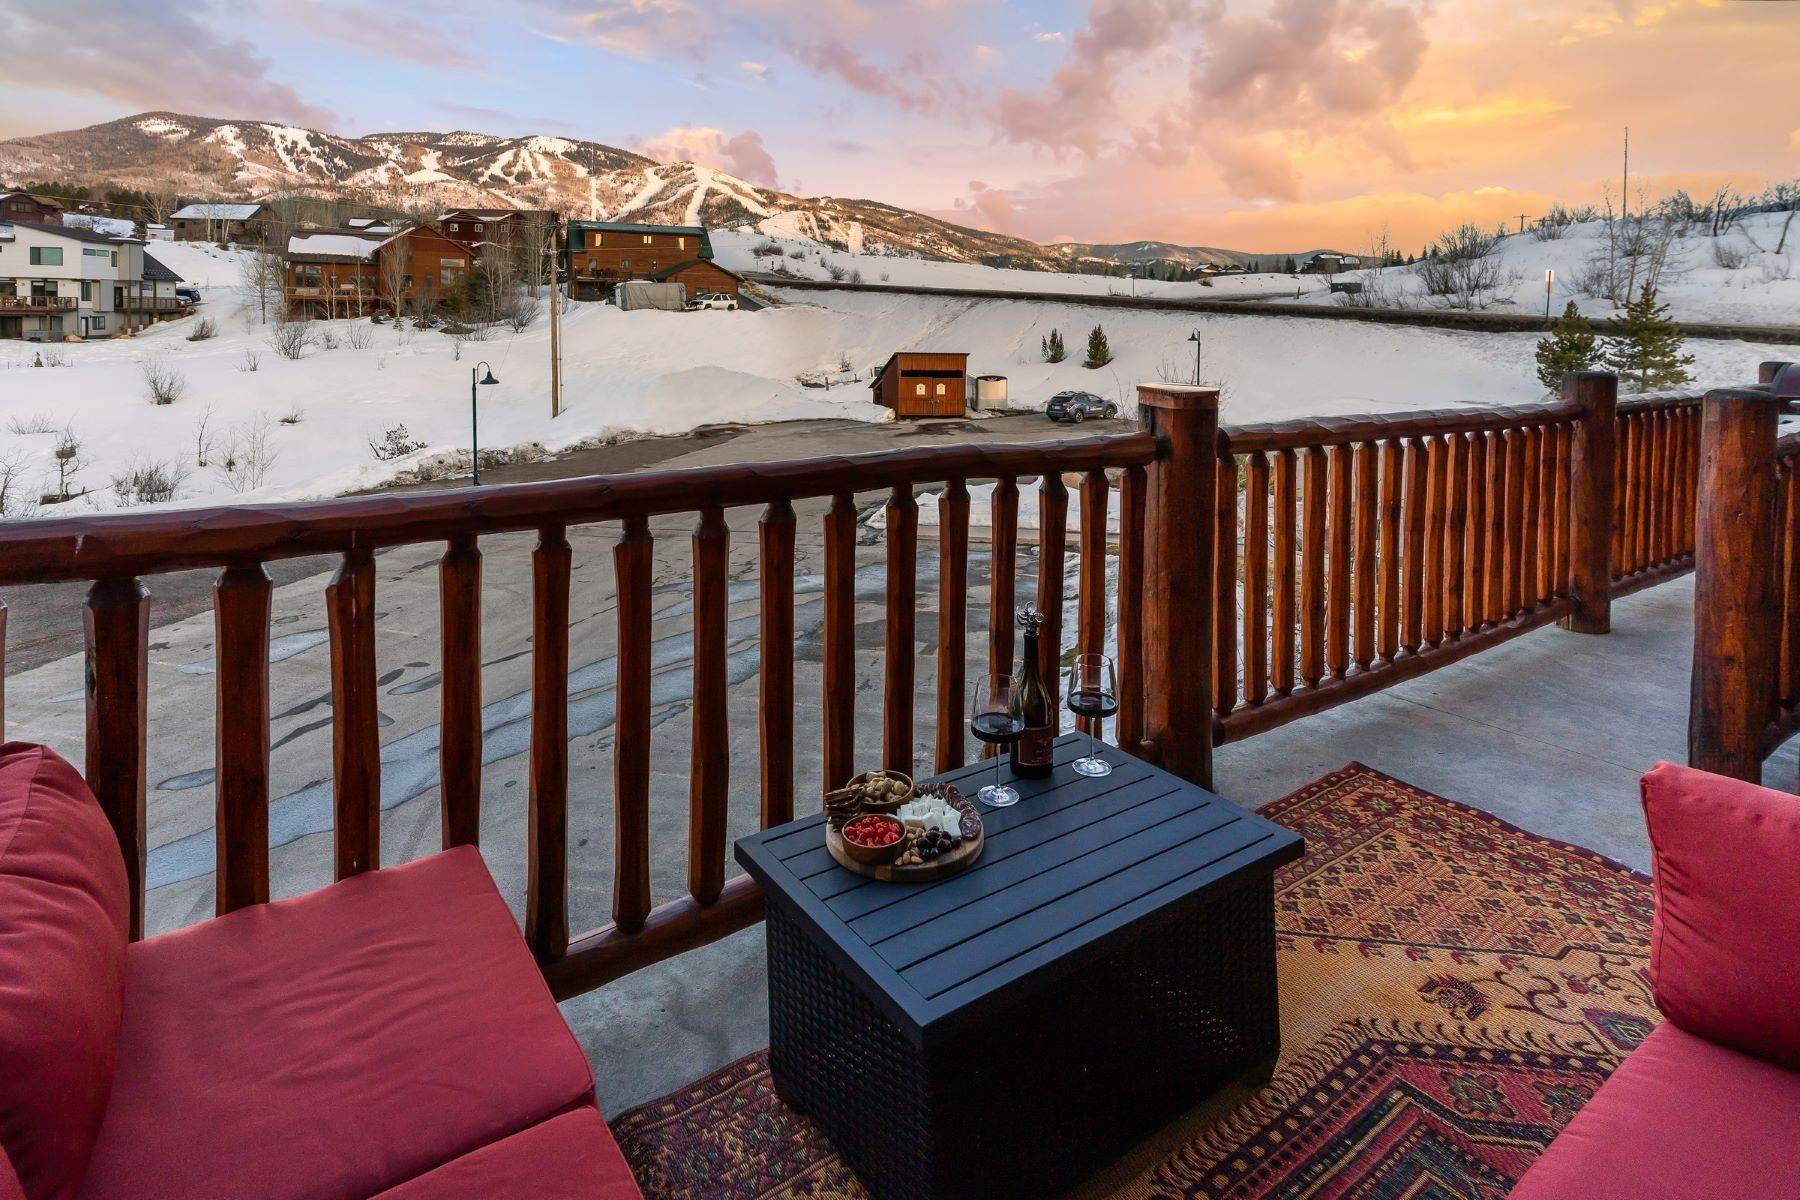 Property for Sale at Fox Creek Park Condos 1169 Hilltop Parkway #306 Steamboat Springs, Colorado 80487 United States